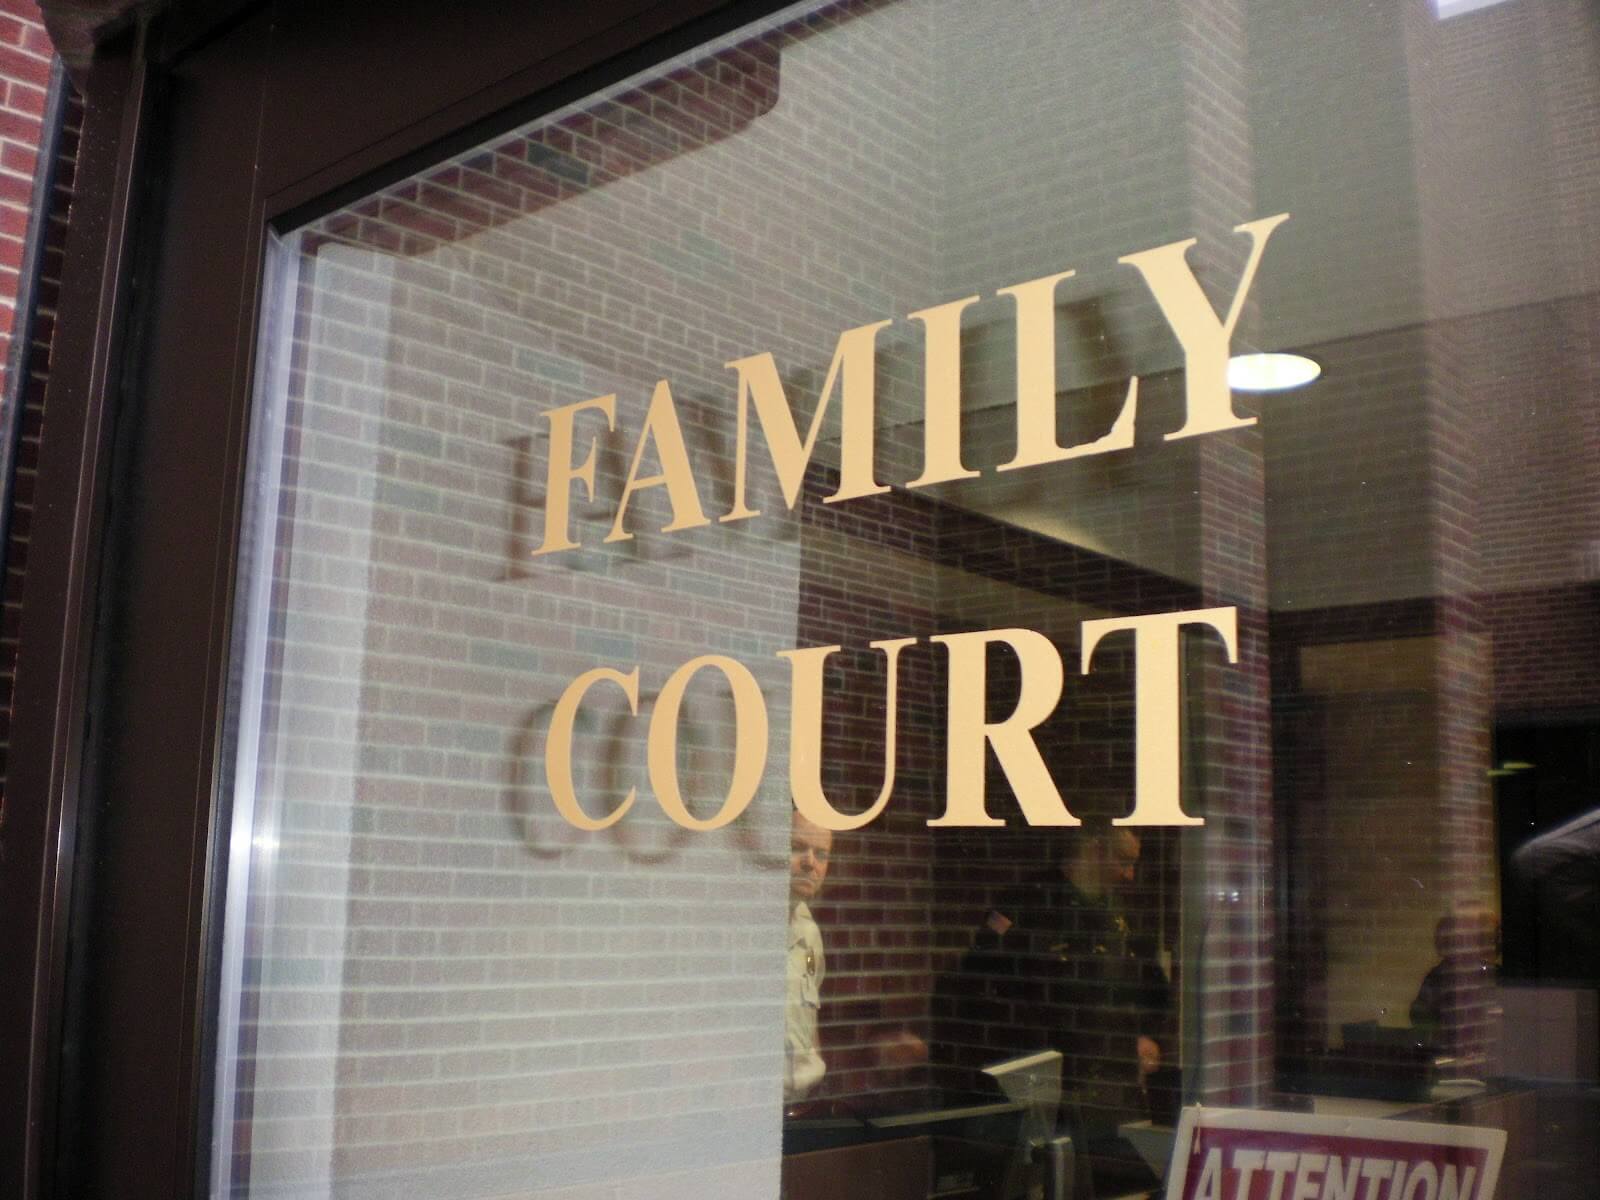 when business goes to family court